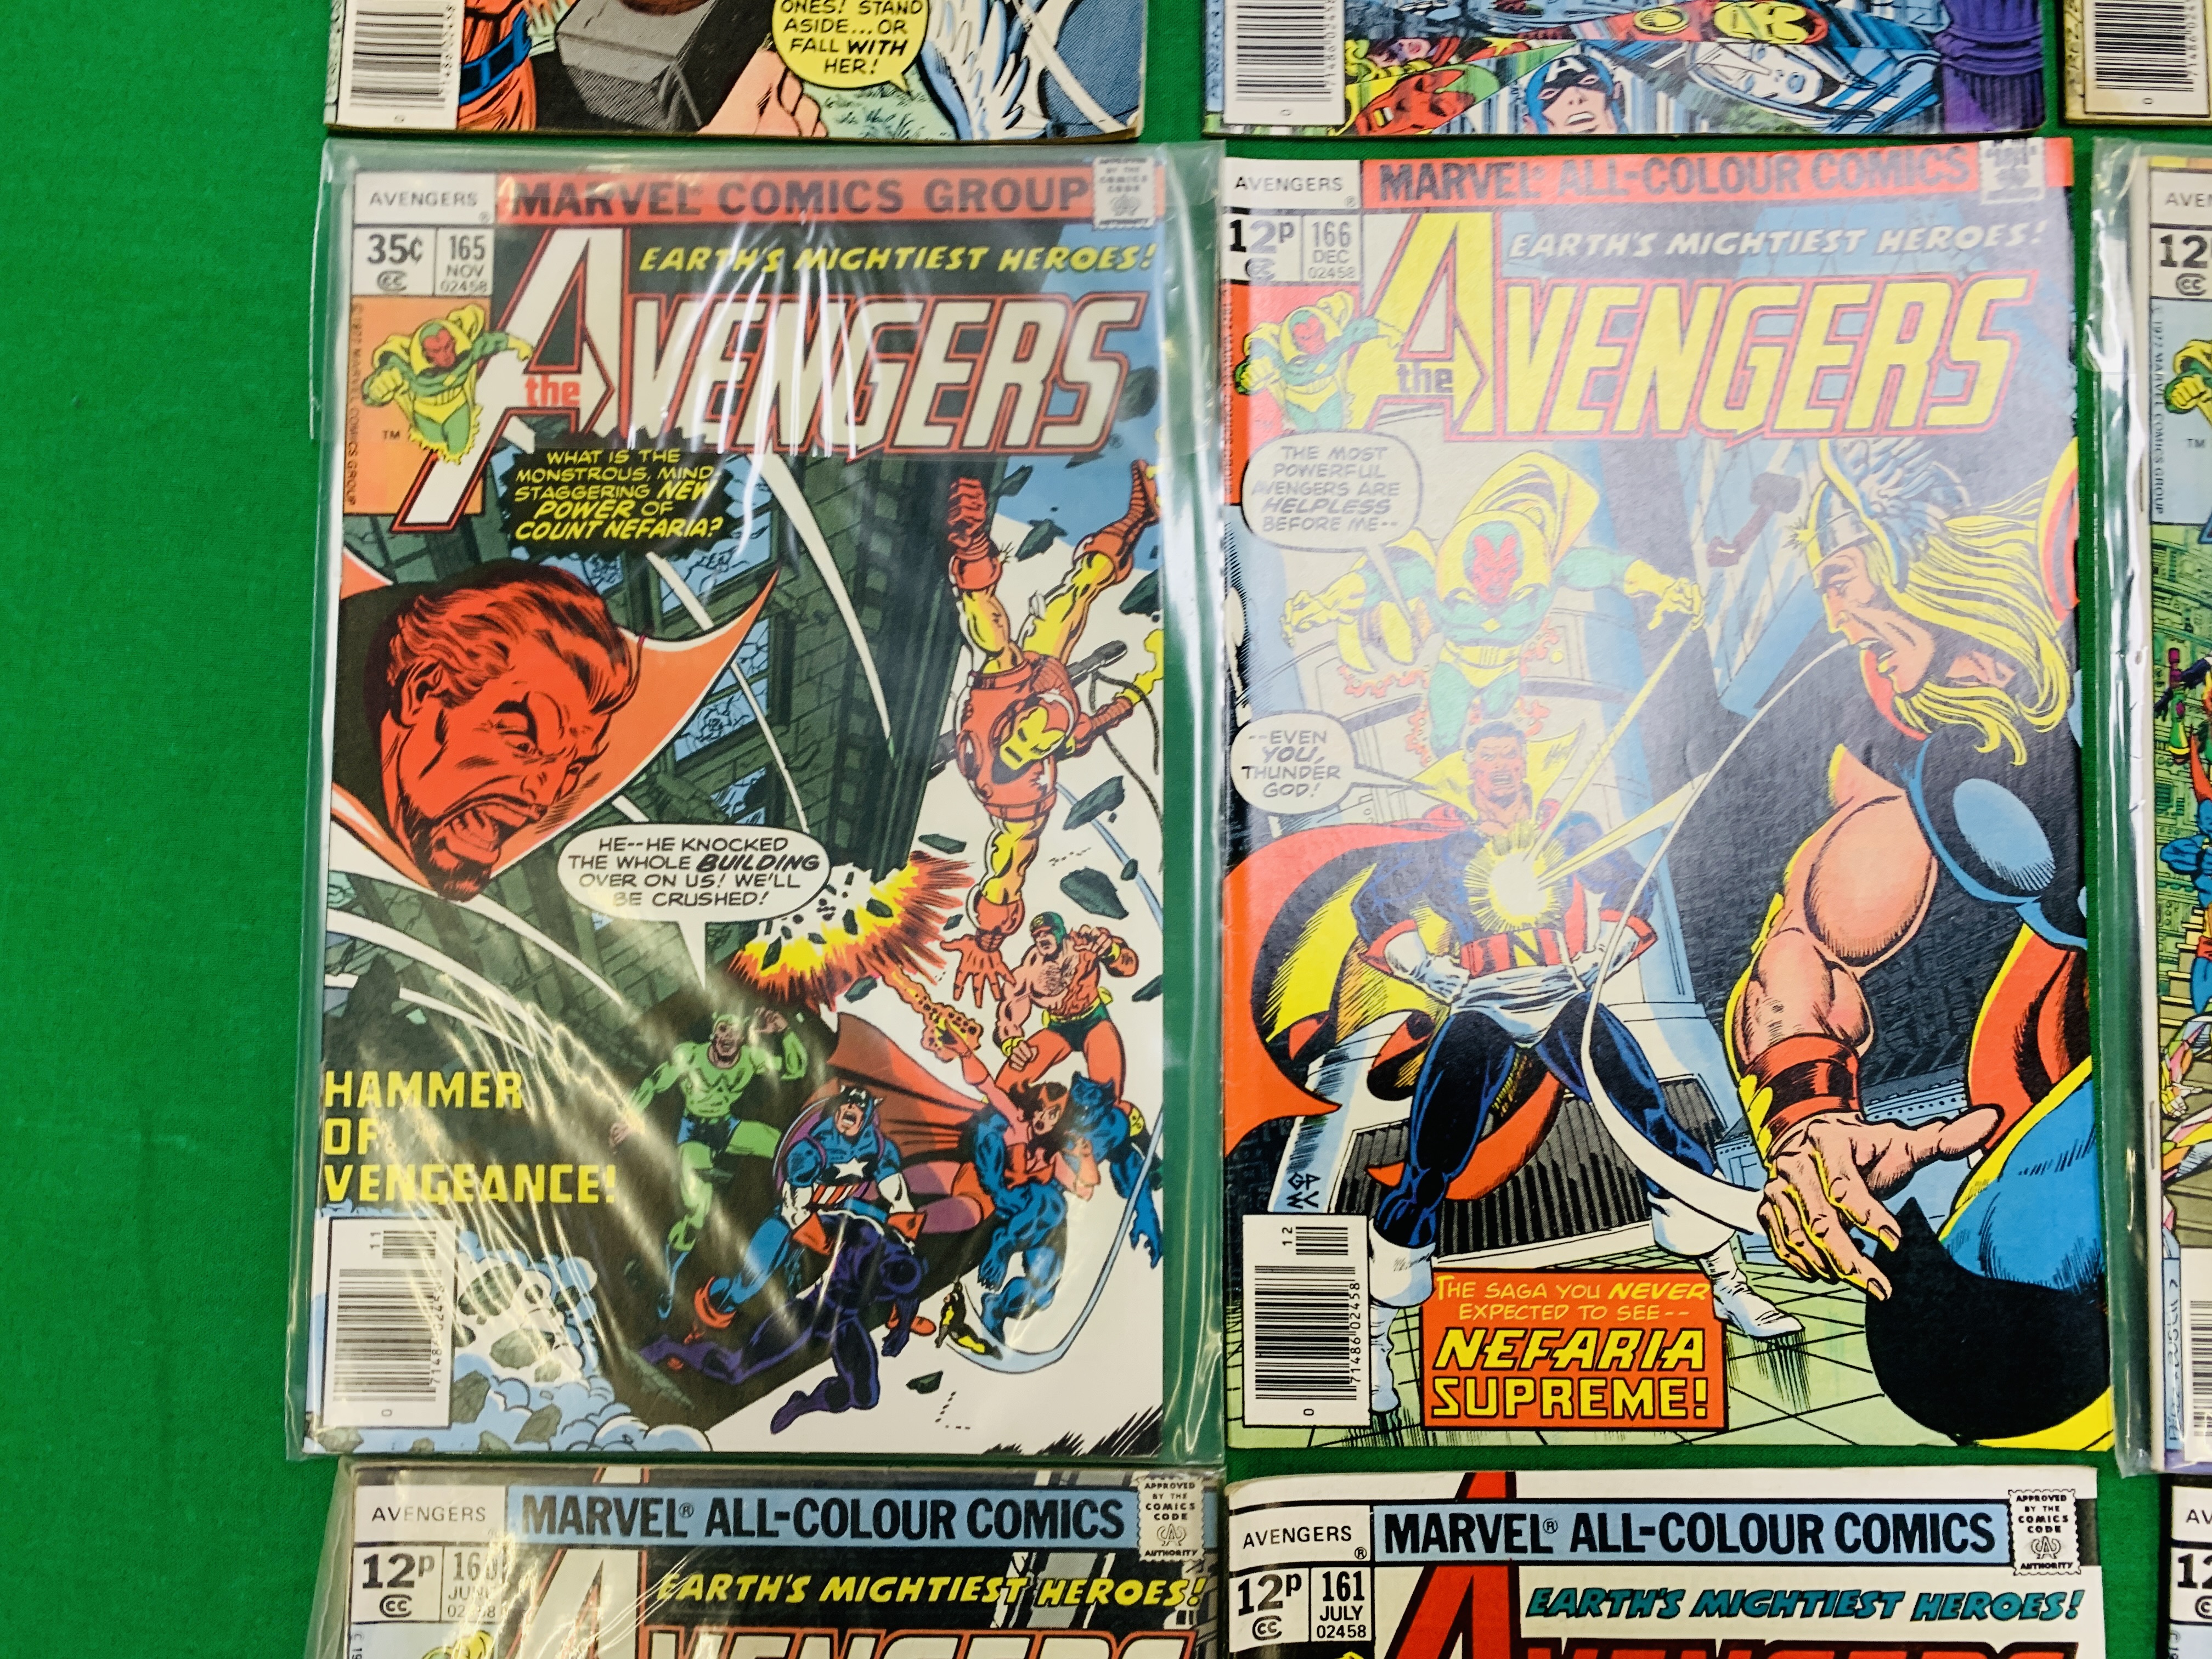 MARVEL COMICS THE AVENGERS NO. 101 - 299, MISSING ISSUES 103 AND 110. - Image 50 of 130